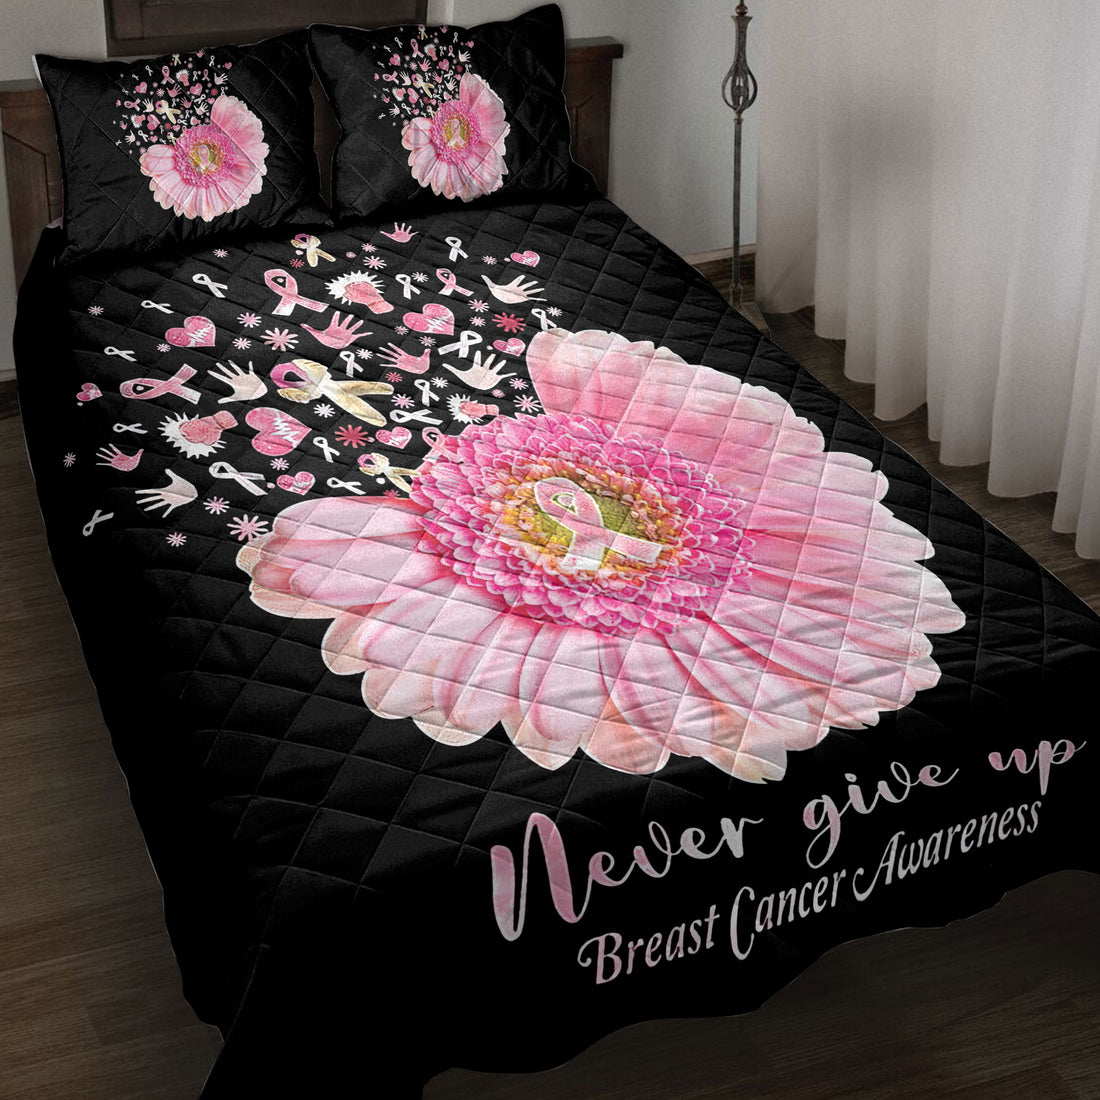 Ohaprints-Quilt-Bed-Set-Pillowcase-Breast-Cancer-Awareness-Never-Give-Up-Blanket-Bedspread-Bedding-3838-Throw (55'' x 60'')